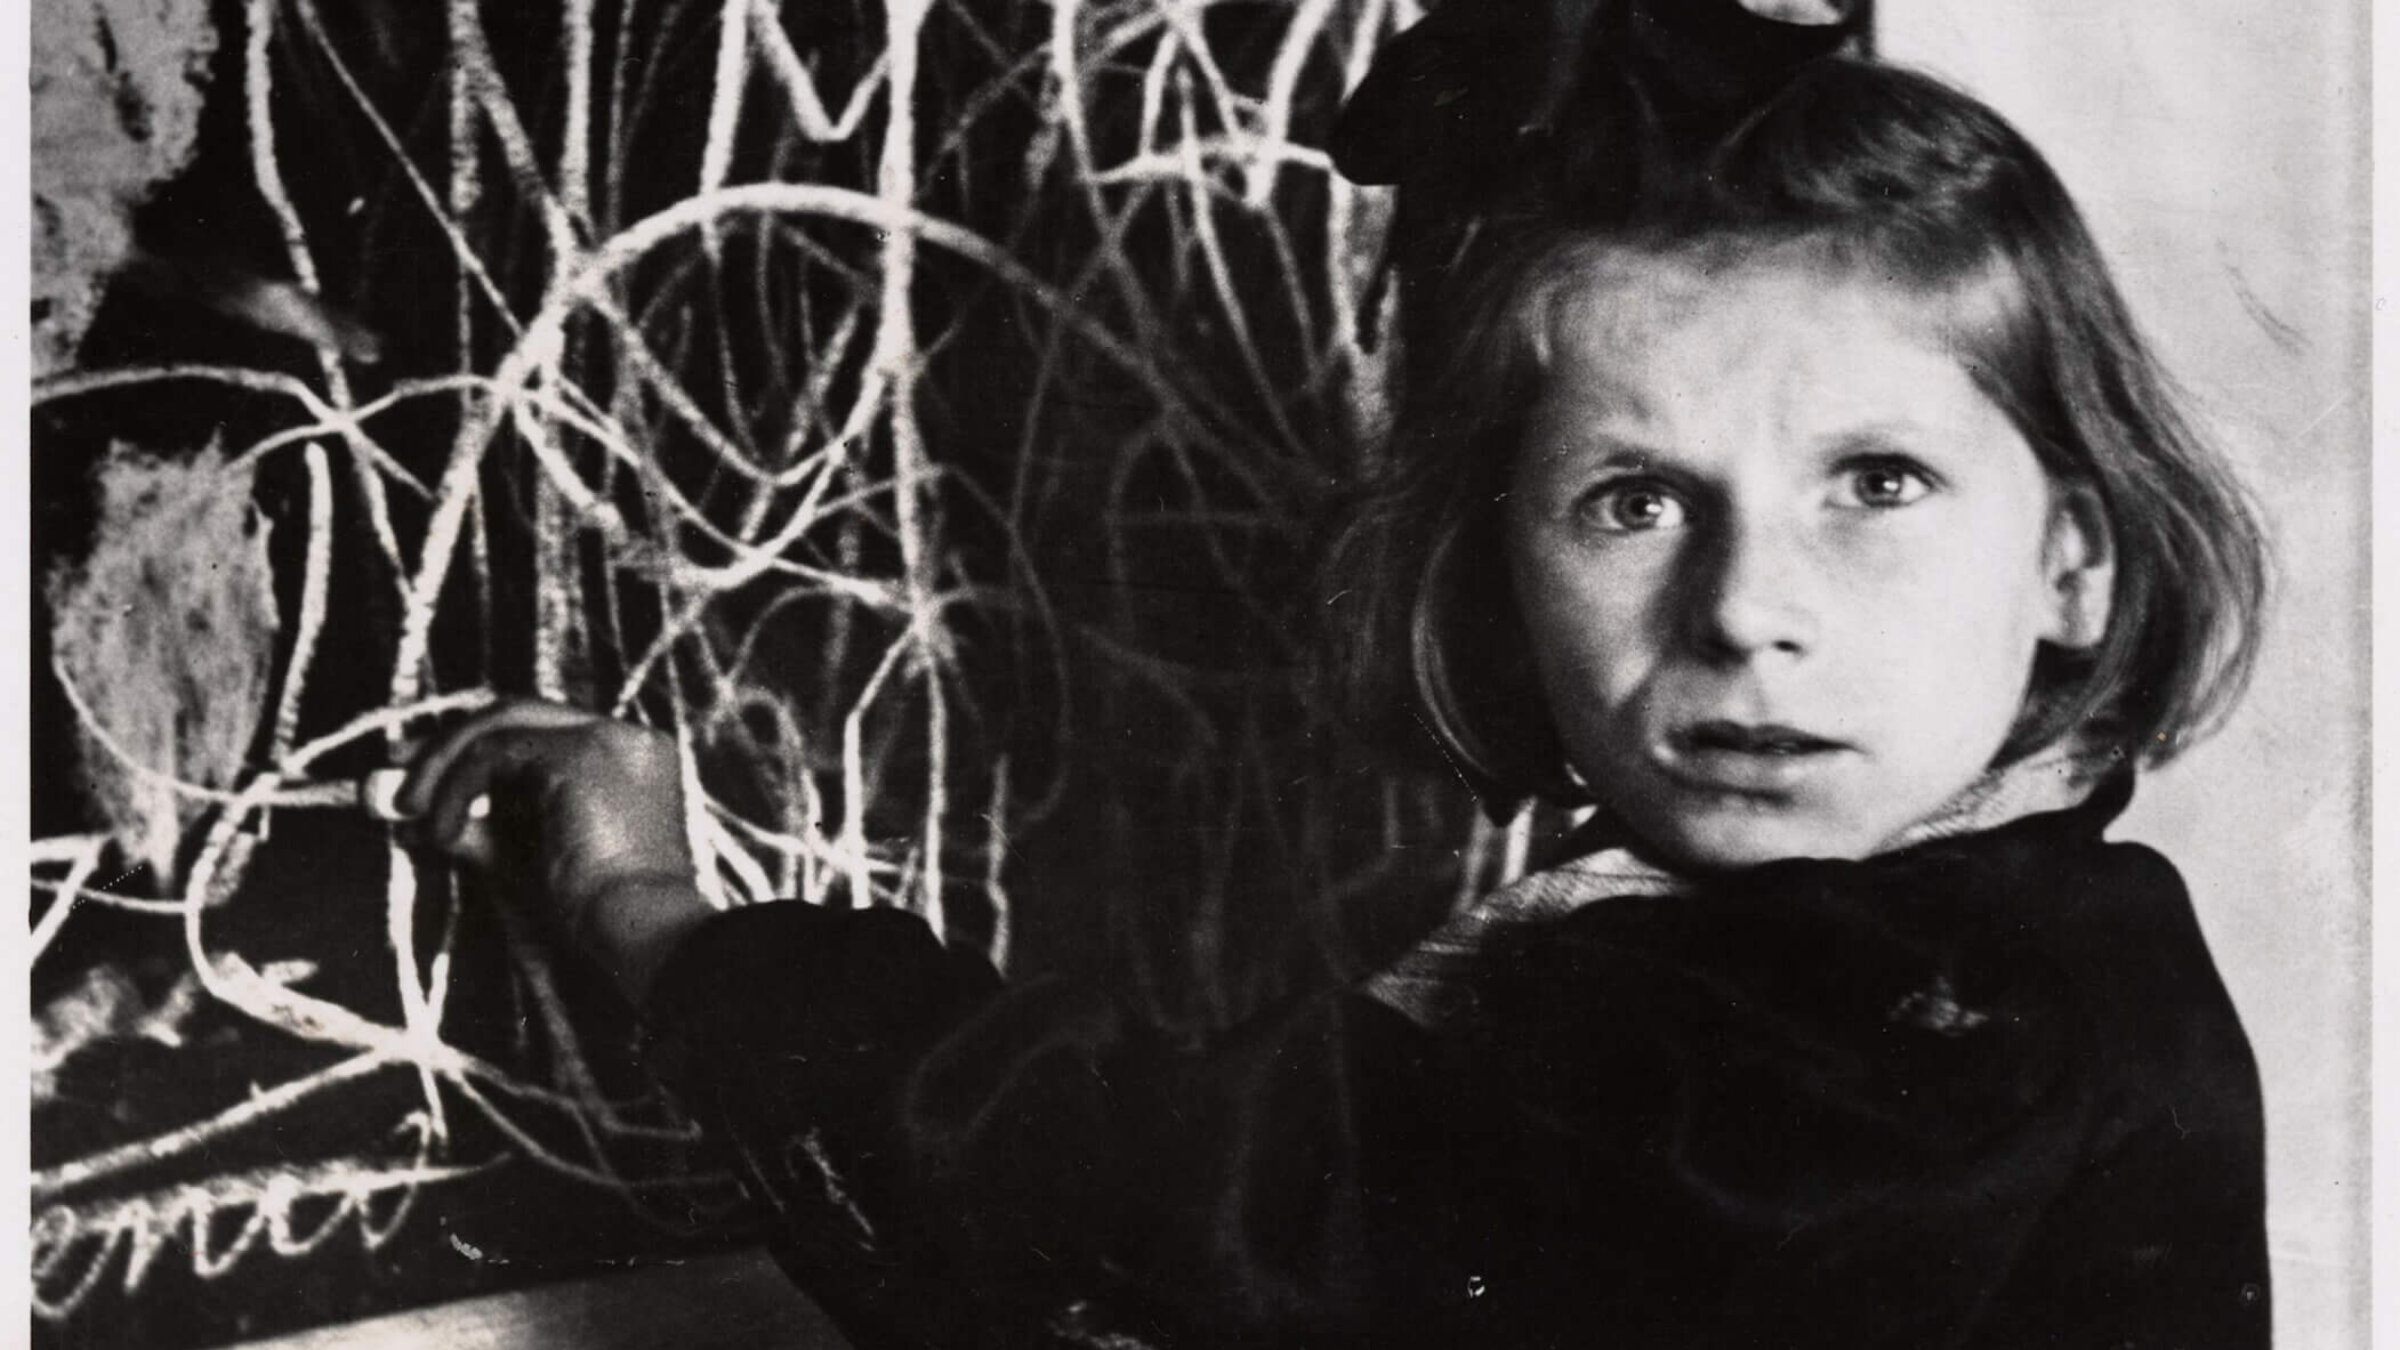 Tereska standing by her drawing of “home” in a home for emotionally disturbed children, in Warsaw, Poland, 1948.